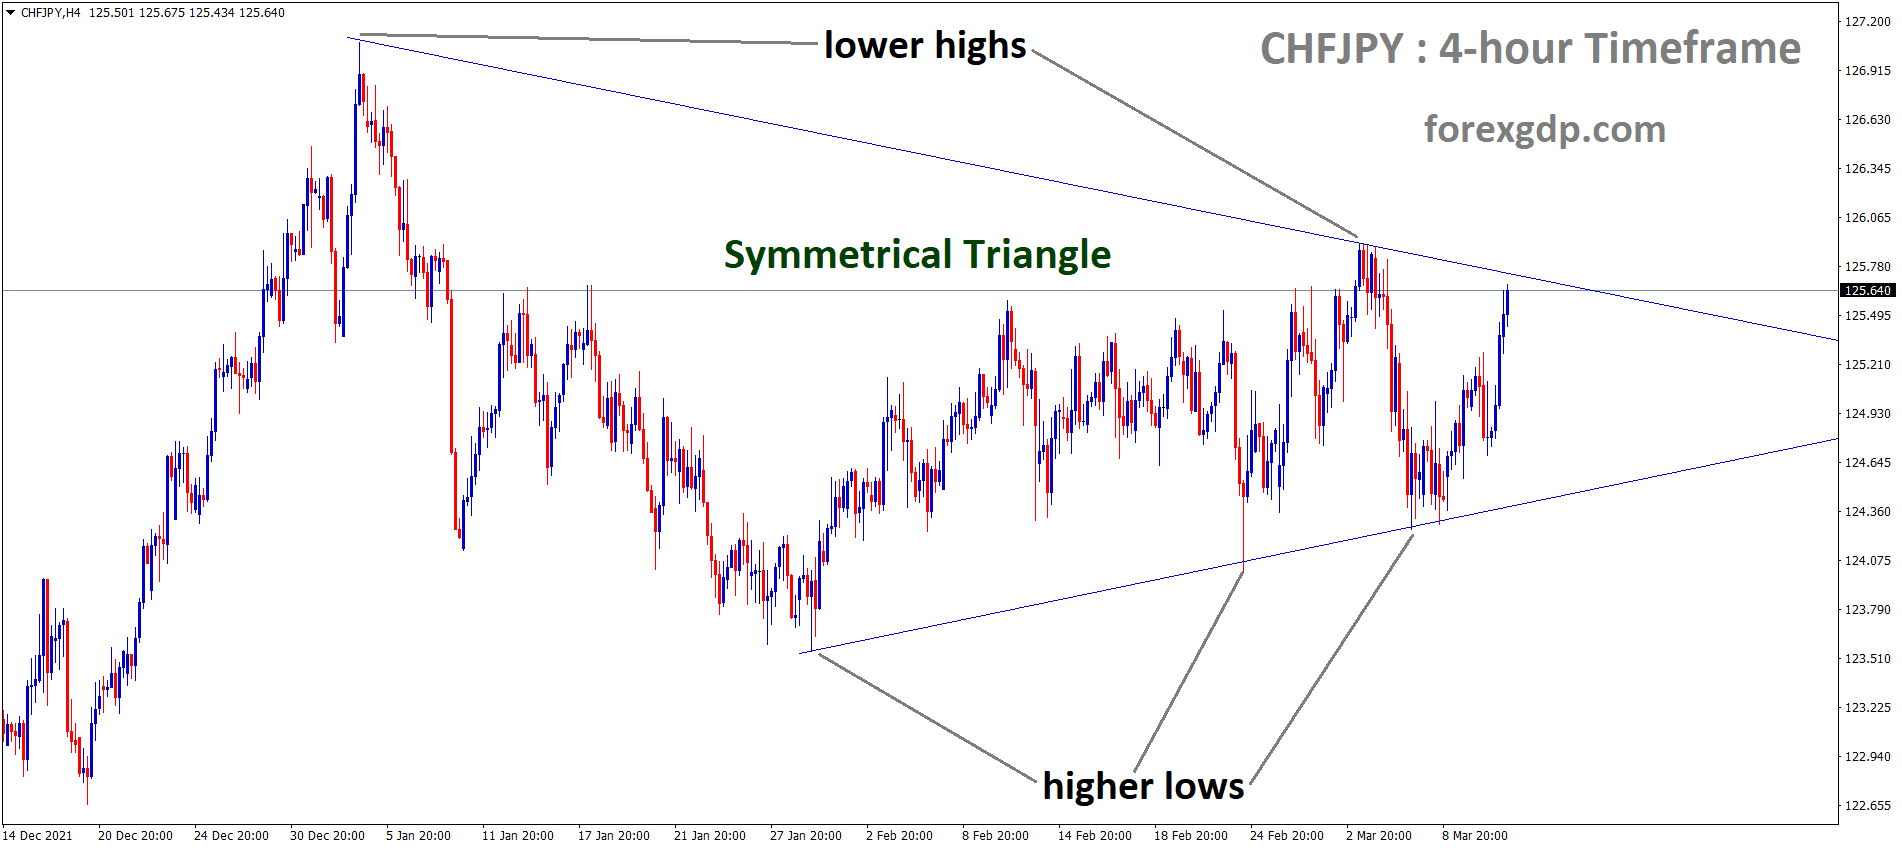 CHFJPY is moving in the Symmetrical triangle pattern and the market has reached the top area of the pattern